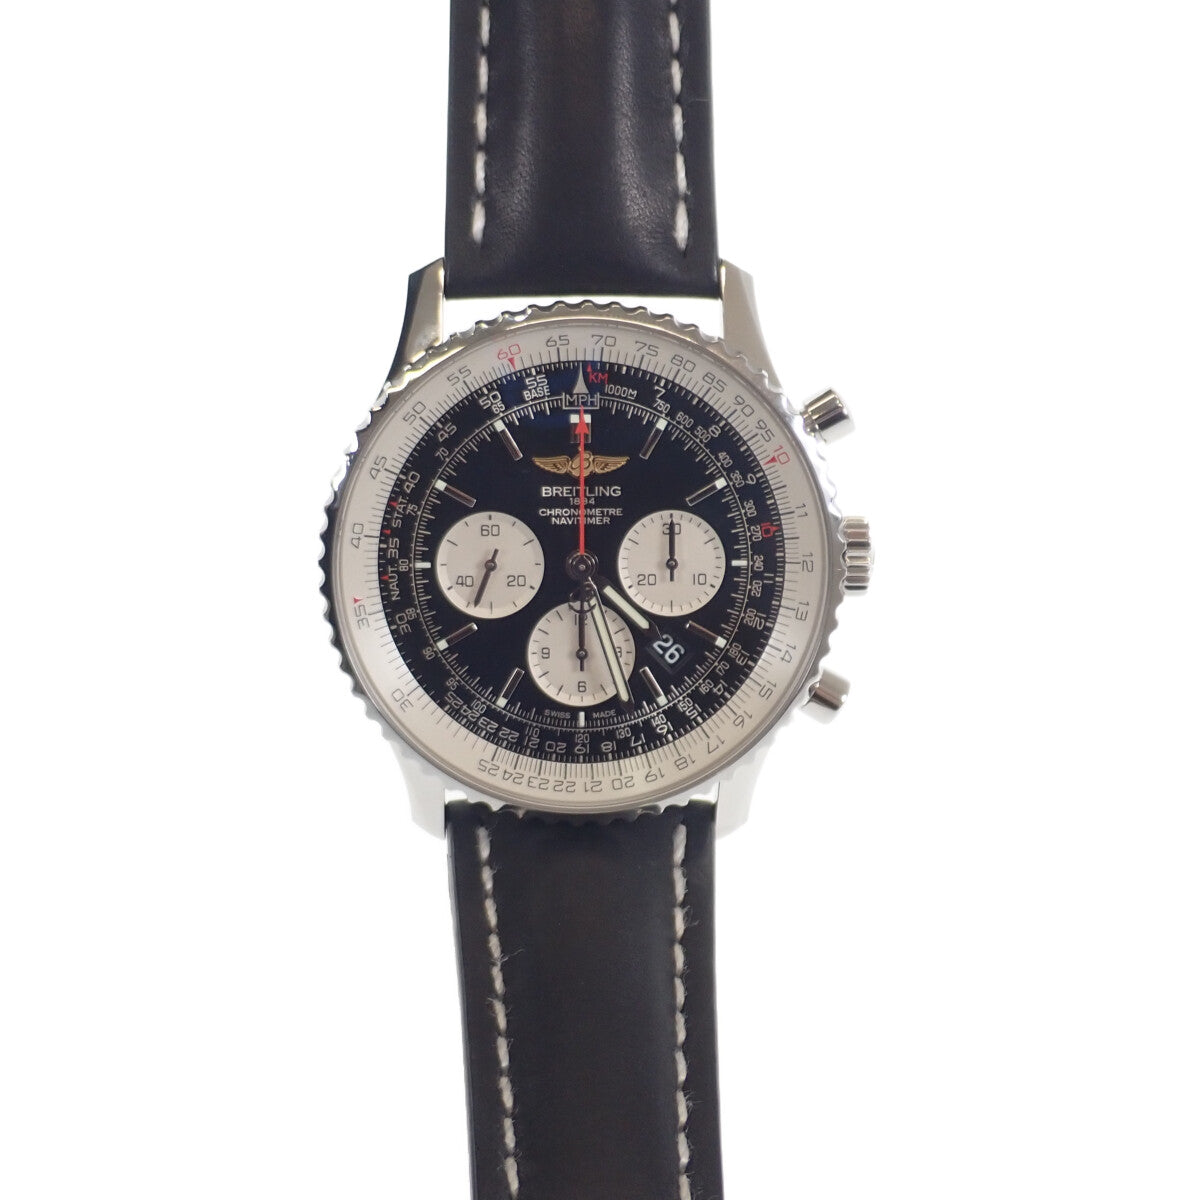 BREITLING Navitimer 01 Men's Chronograph, Stainless Steel/Leather, Silver, Black Dial AB012721/BD09(AB0127)